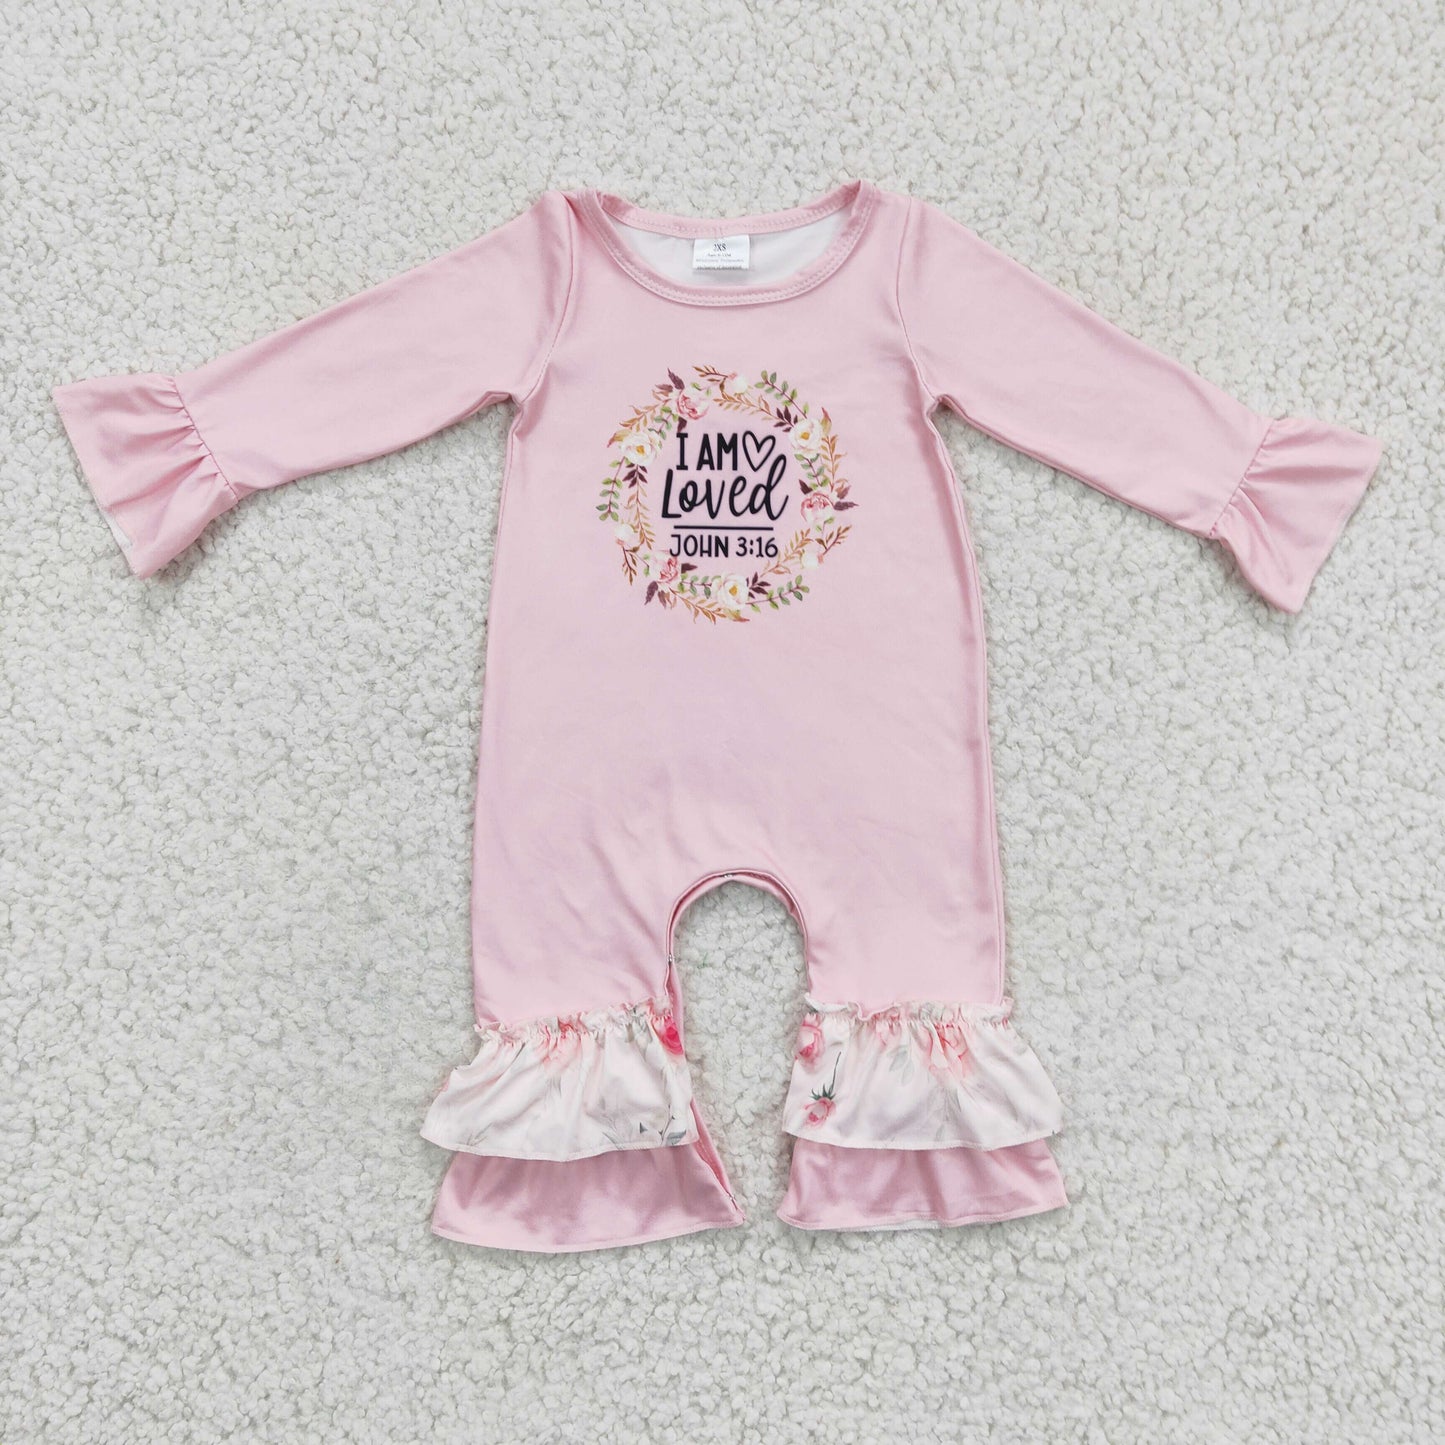 I am loved floral pink cute baby girls romper